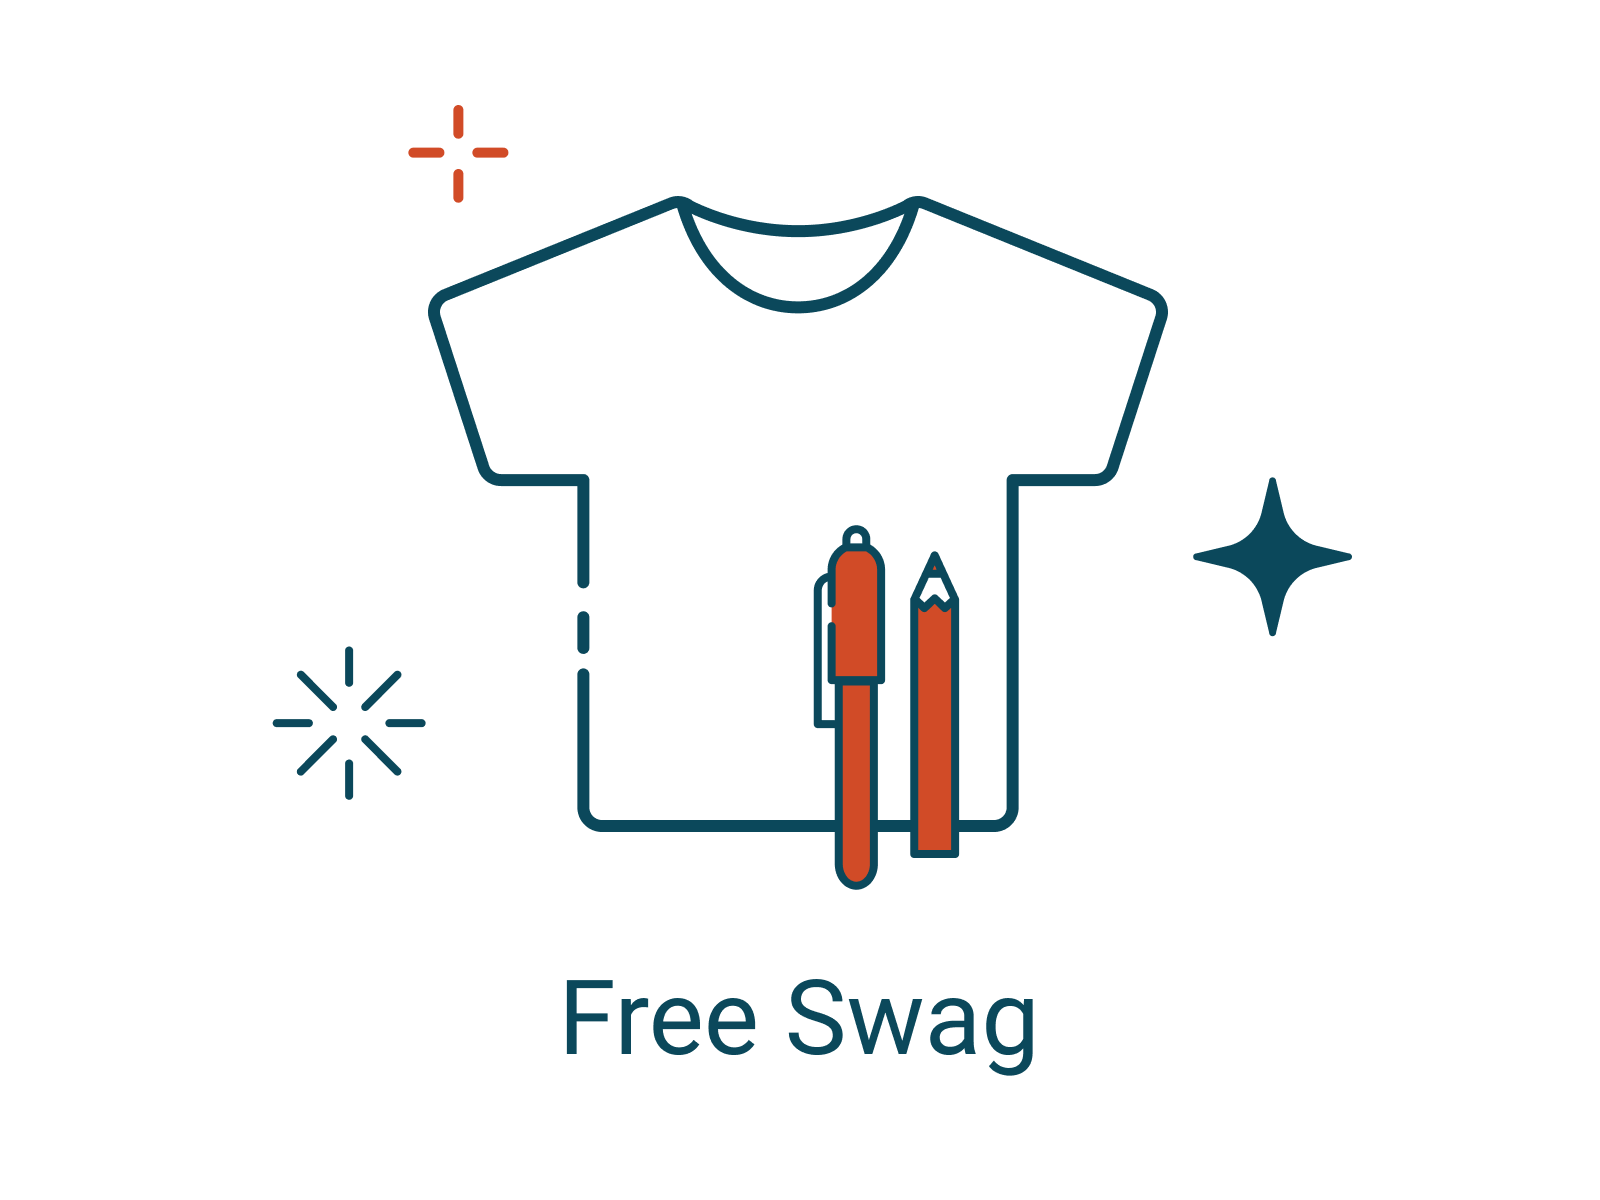 Illustration of a t-shirt, pen, and pencil with the words "Free Swag" underneath.